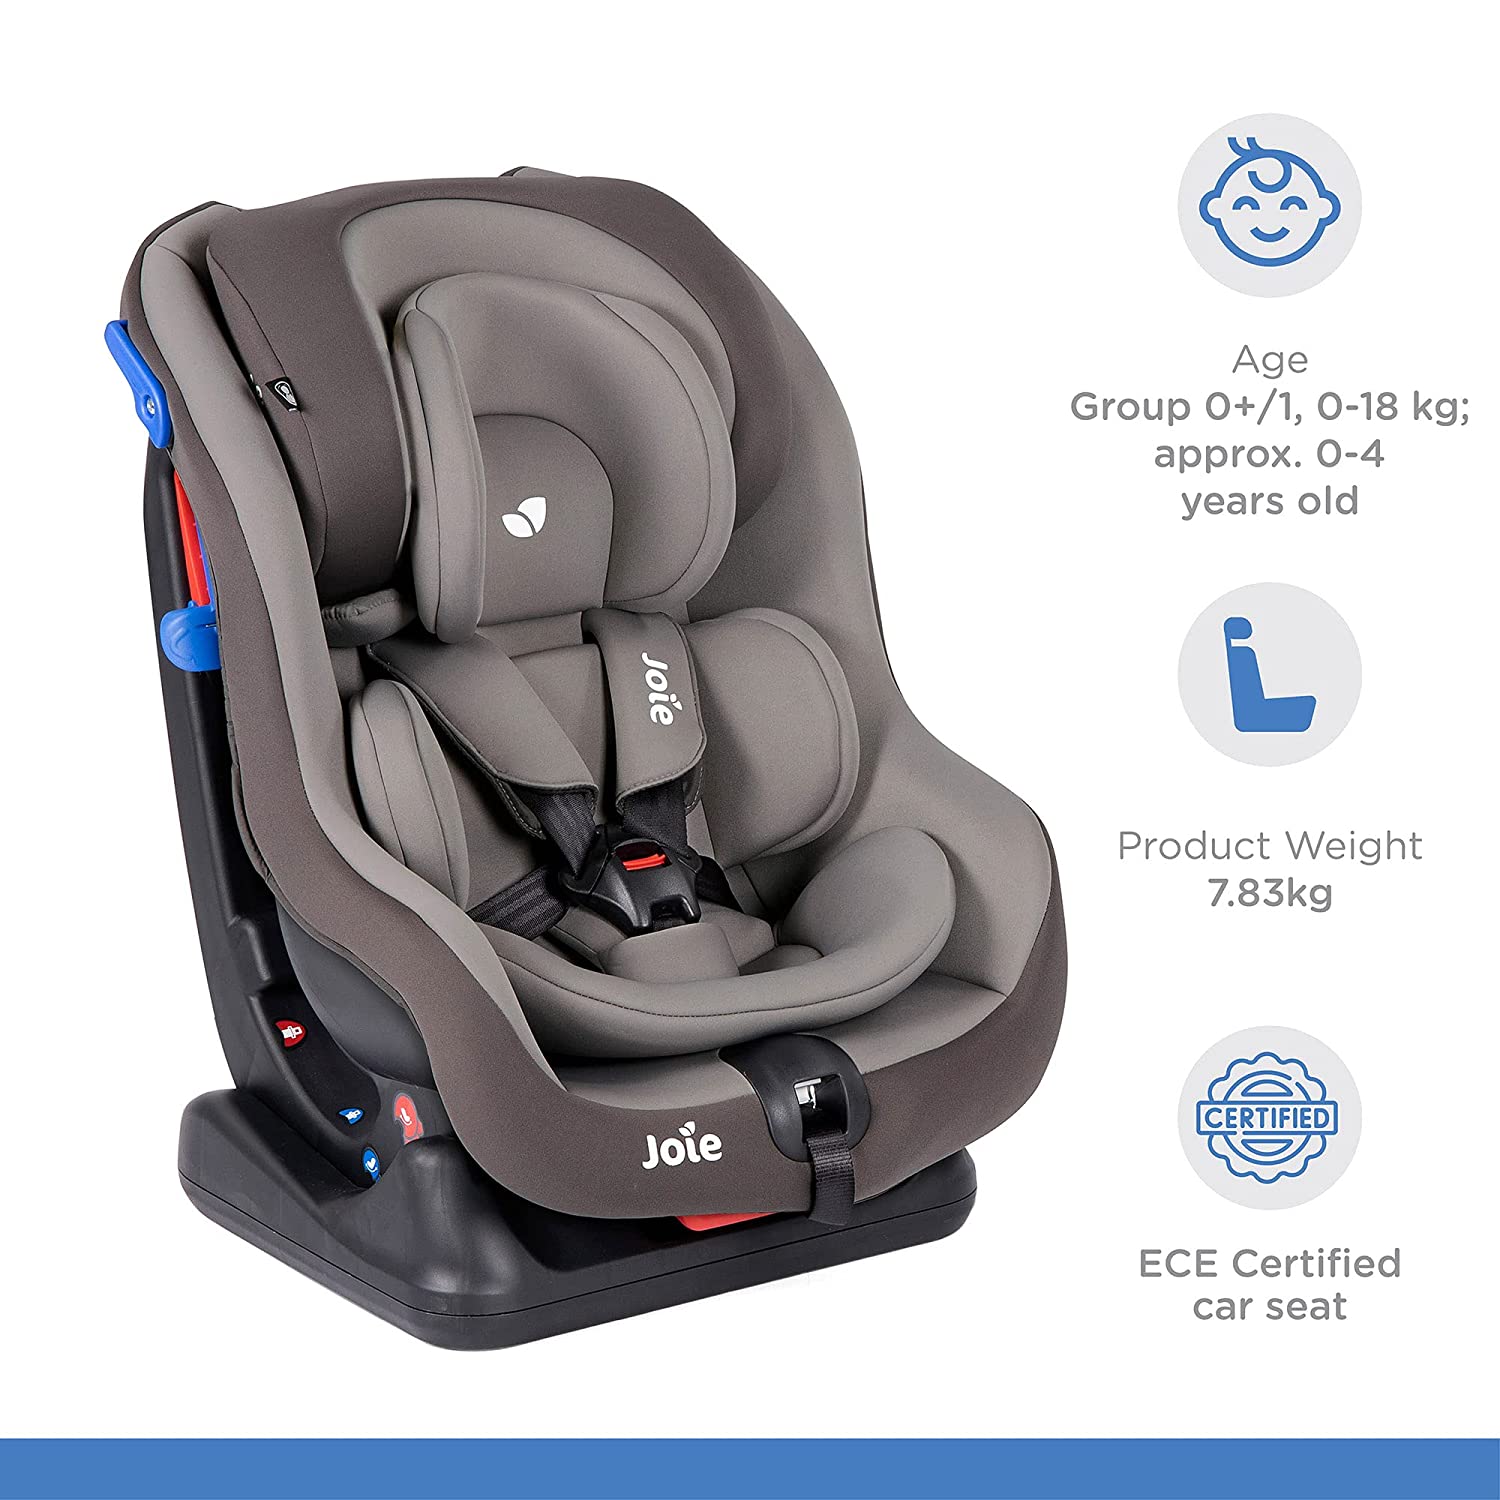 All About Joie Steadi Infant Car Seat